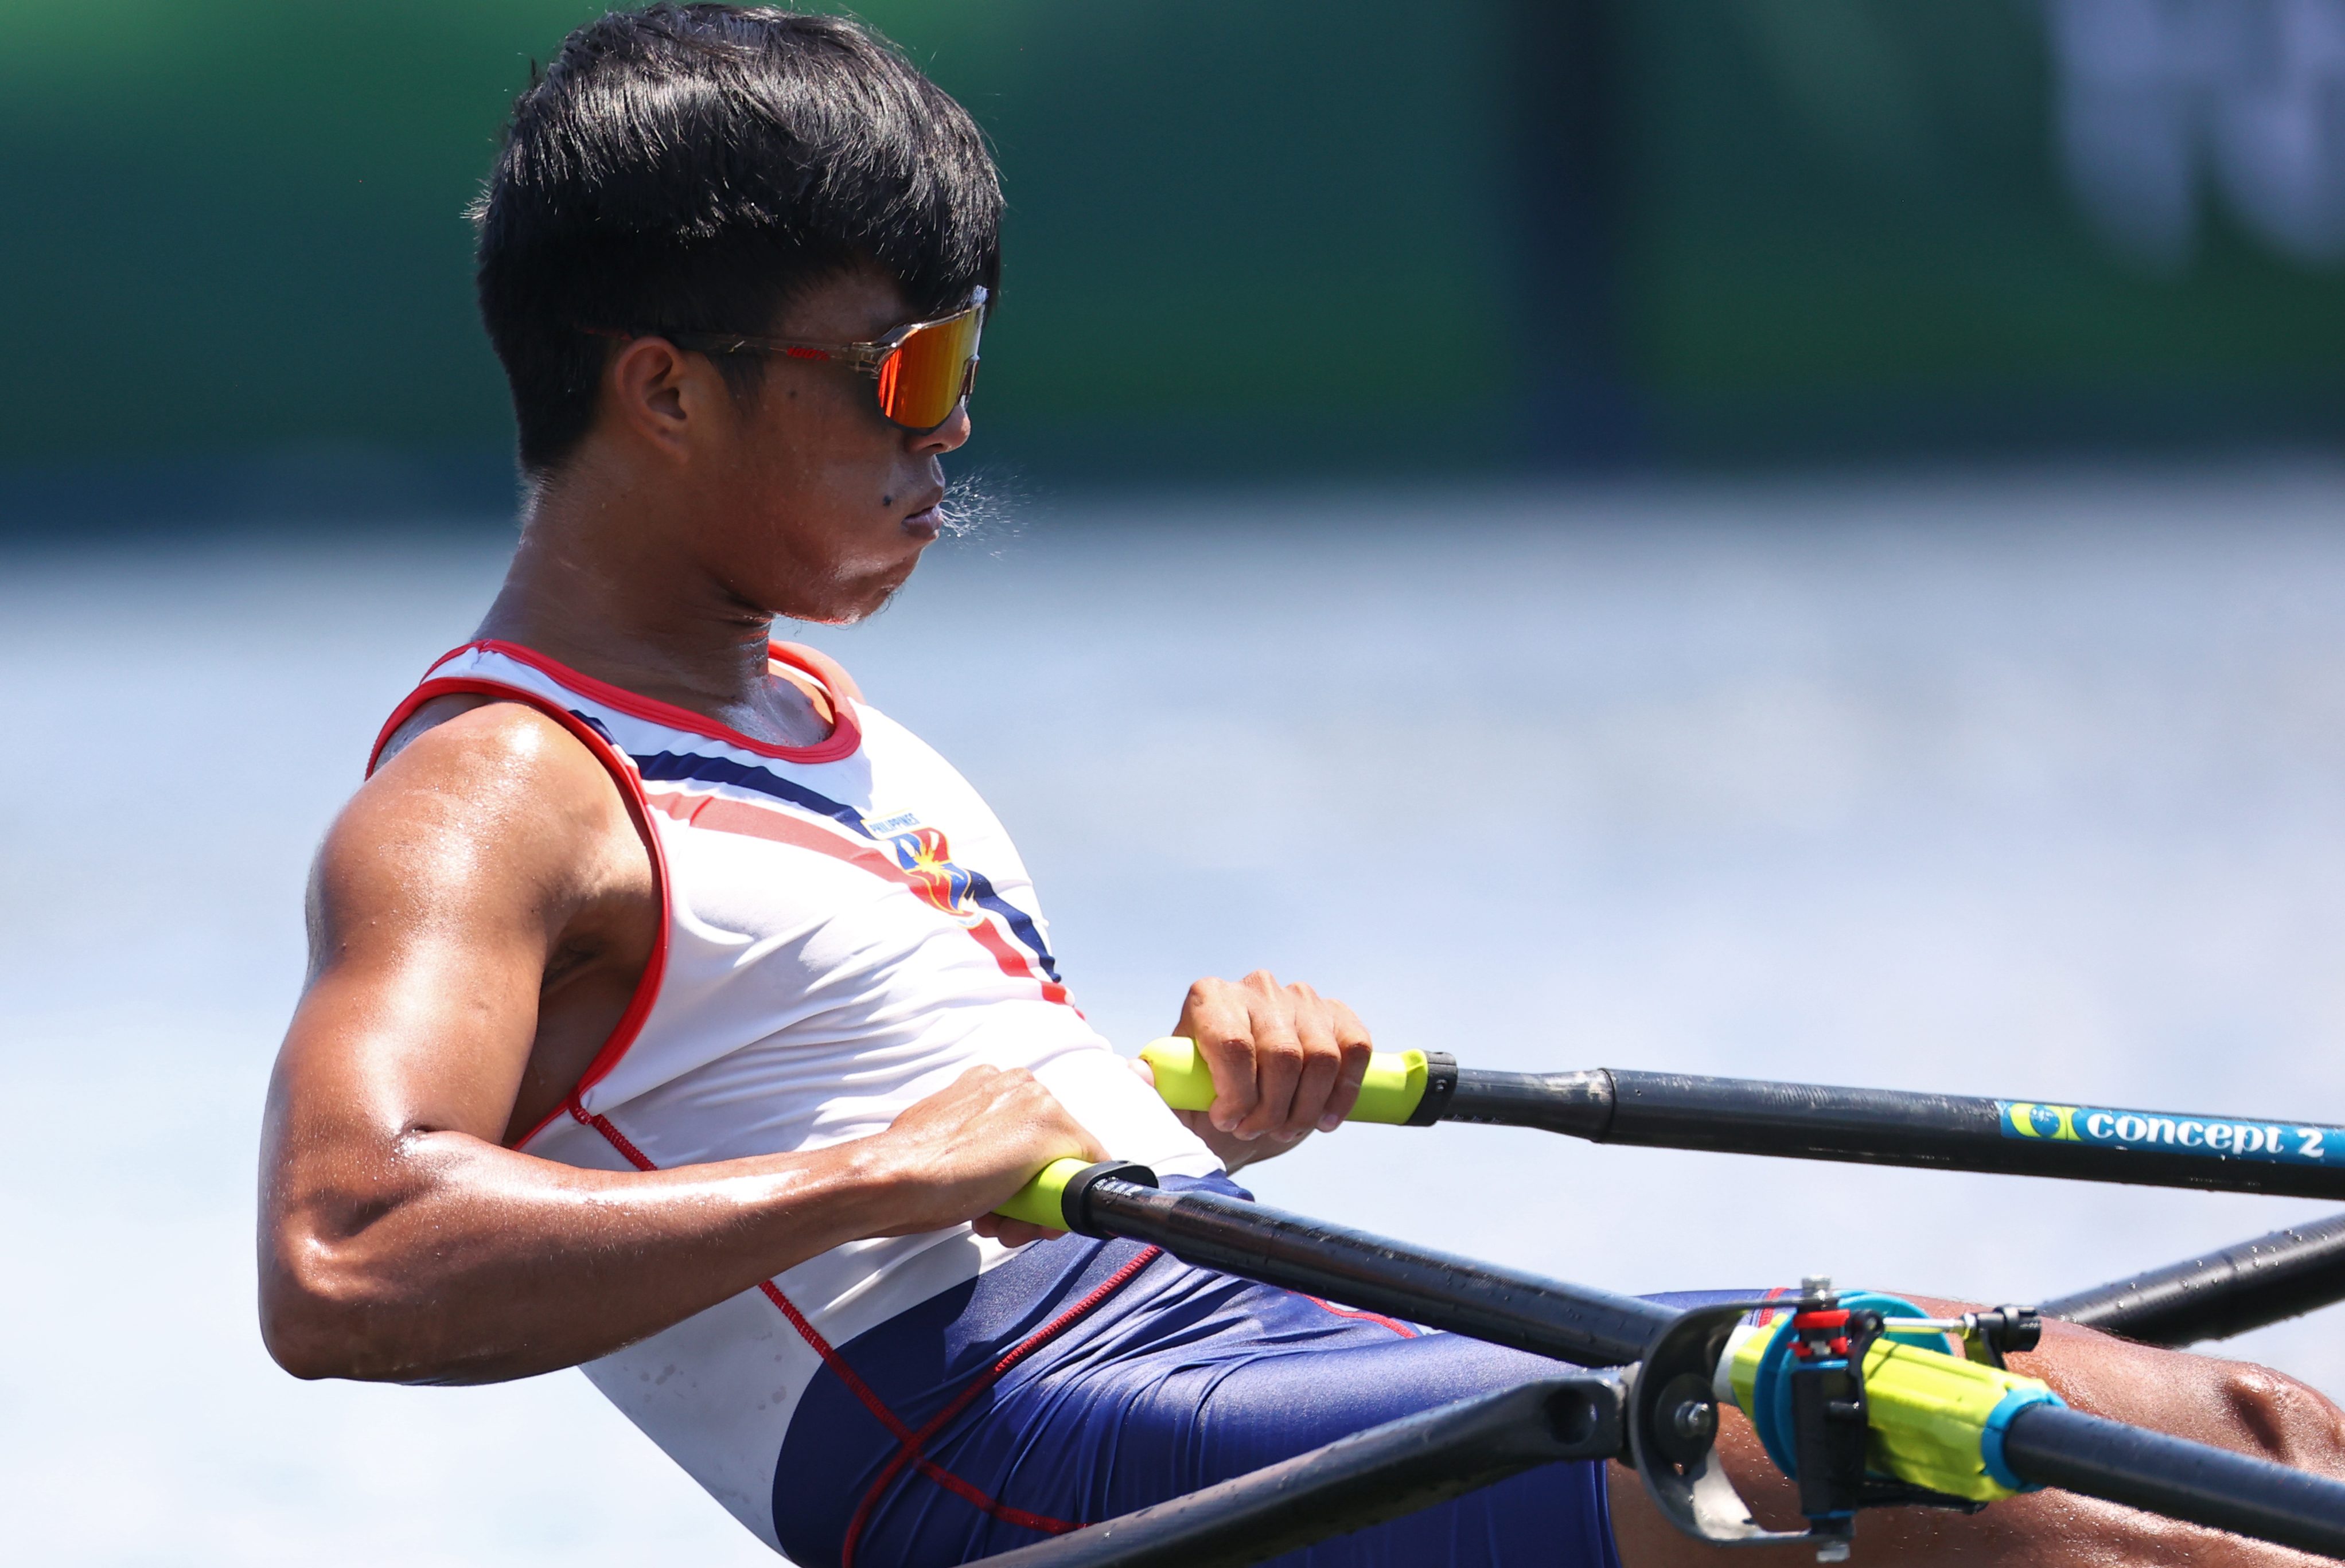 Cris Nievarez aims for best finish in Olympic rowing classification